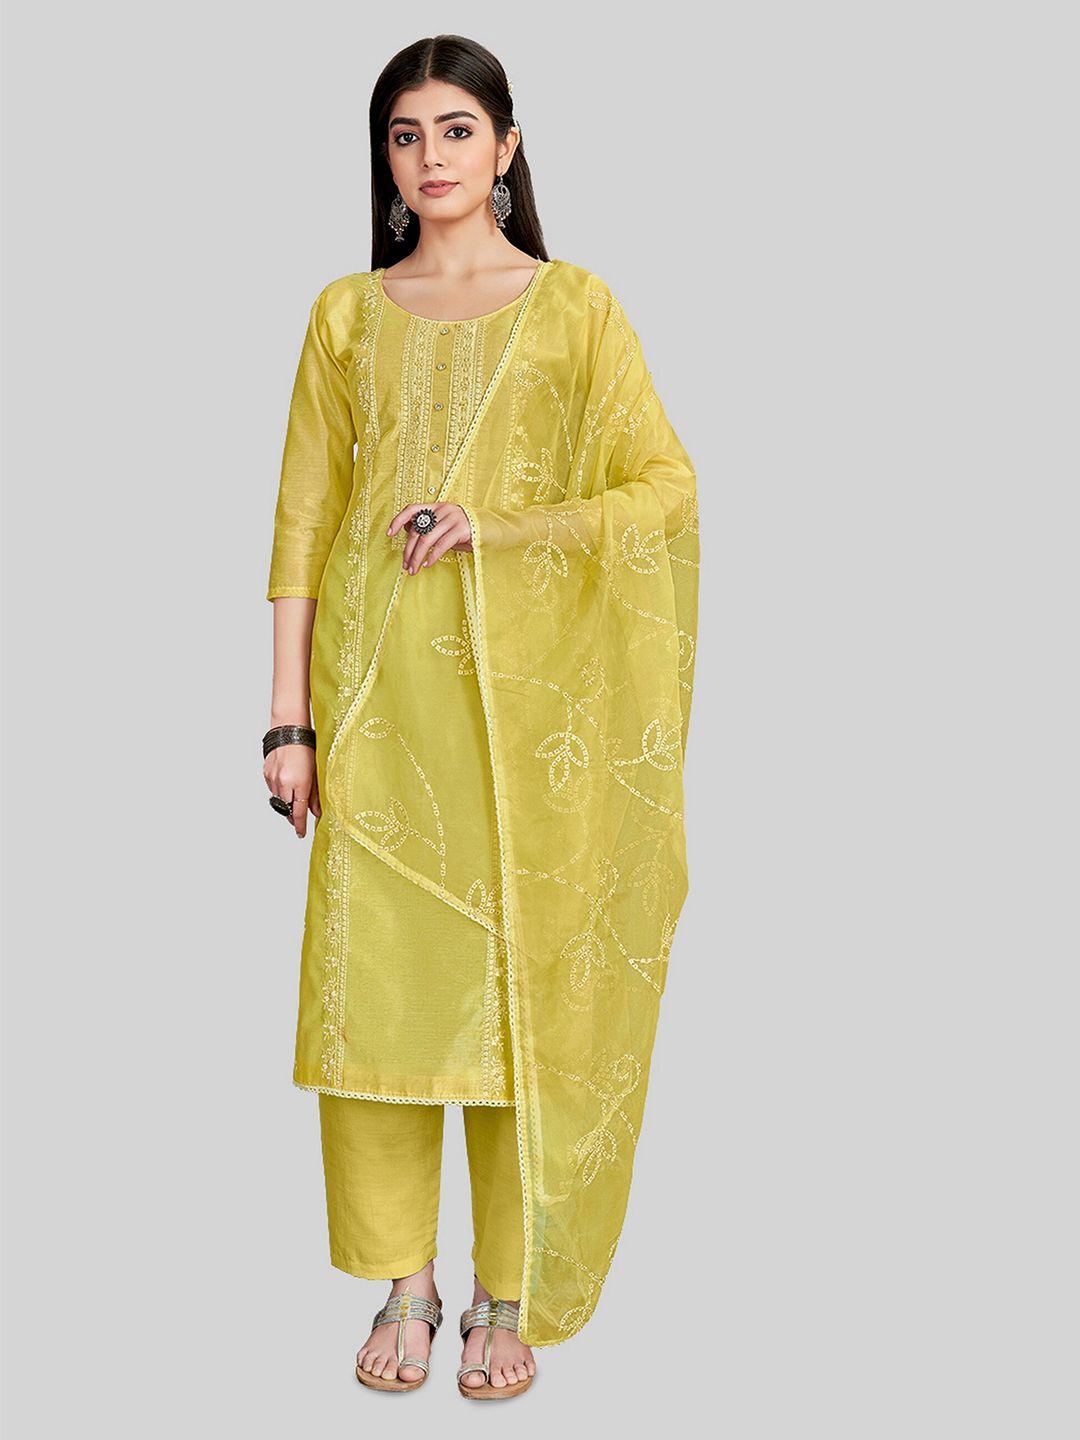 TAVAS Yellow & Gold-Toned Embroidered Unstitched Dress Material